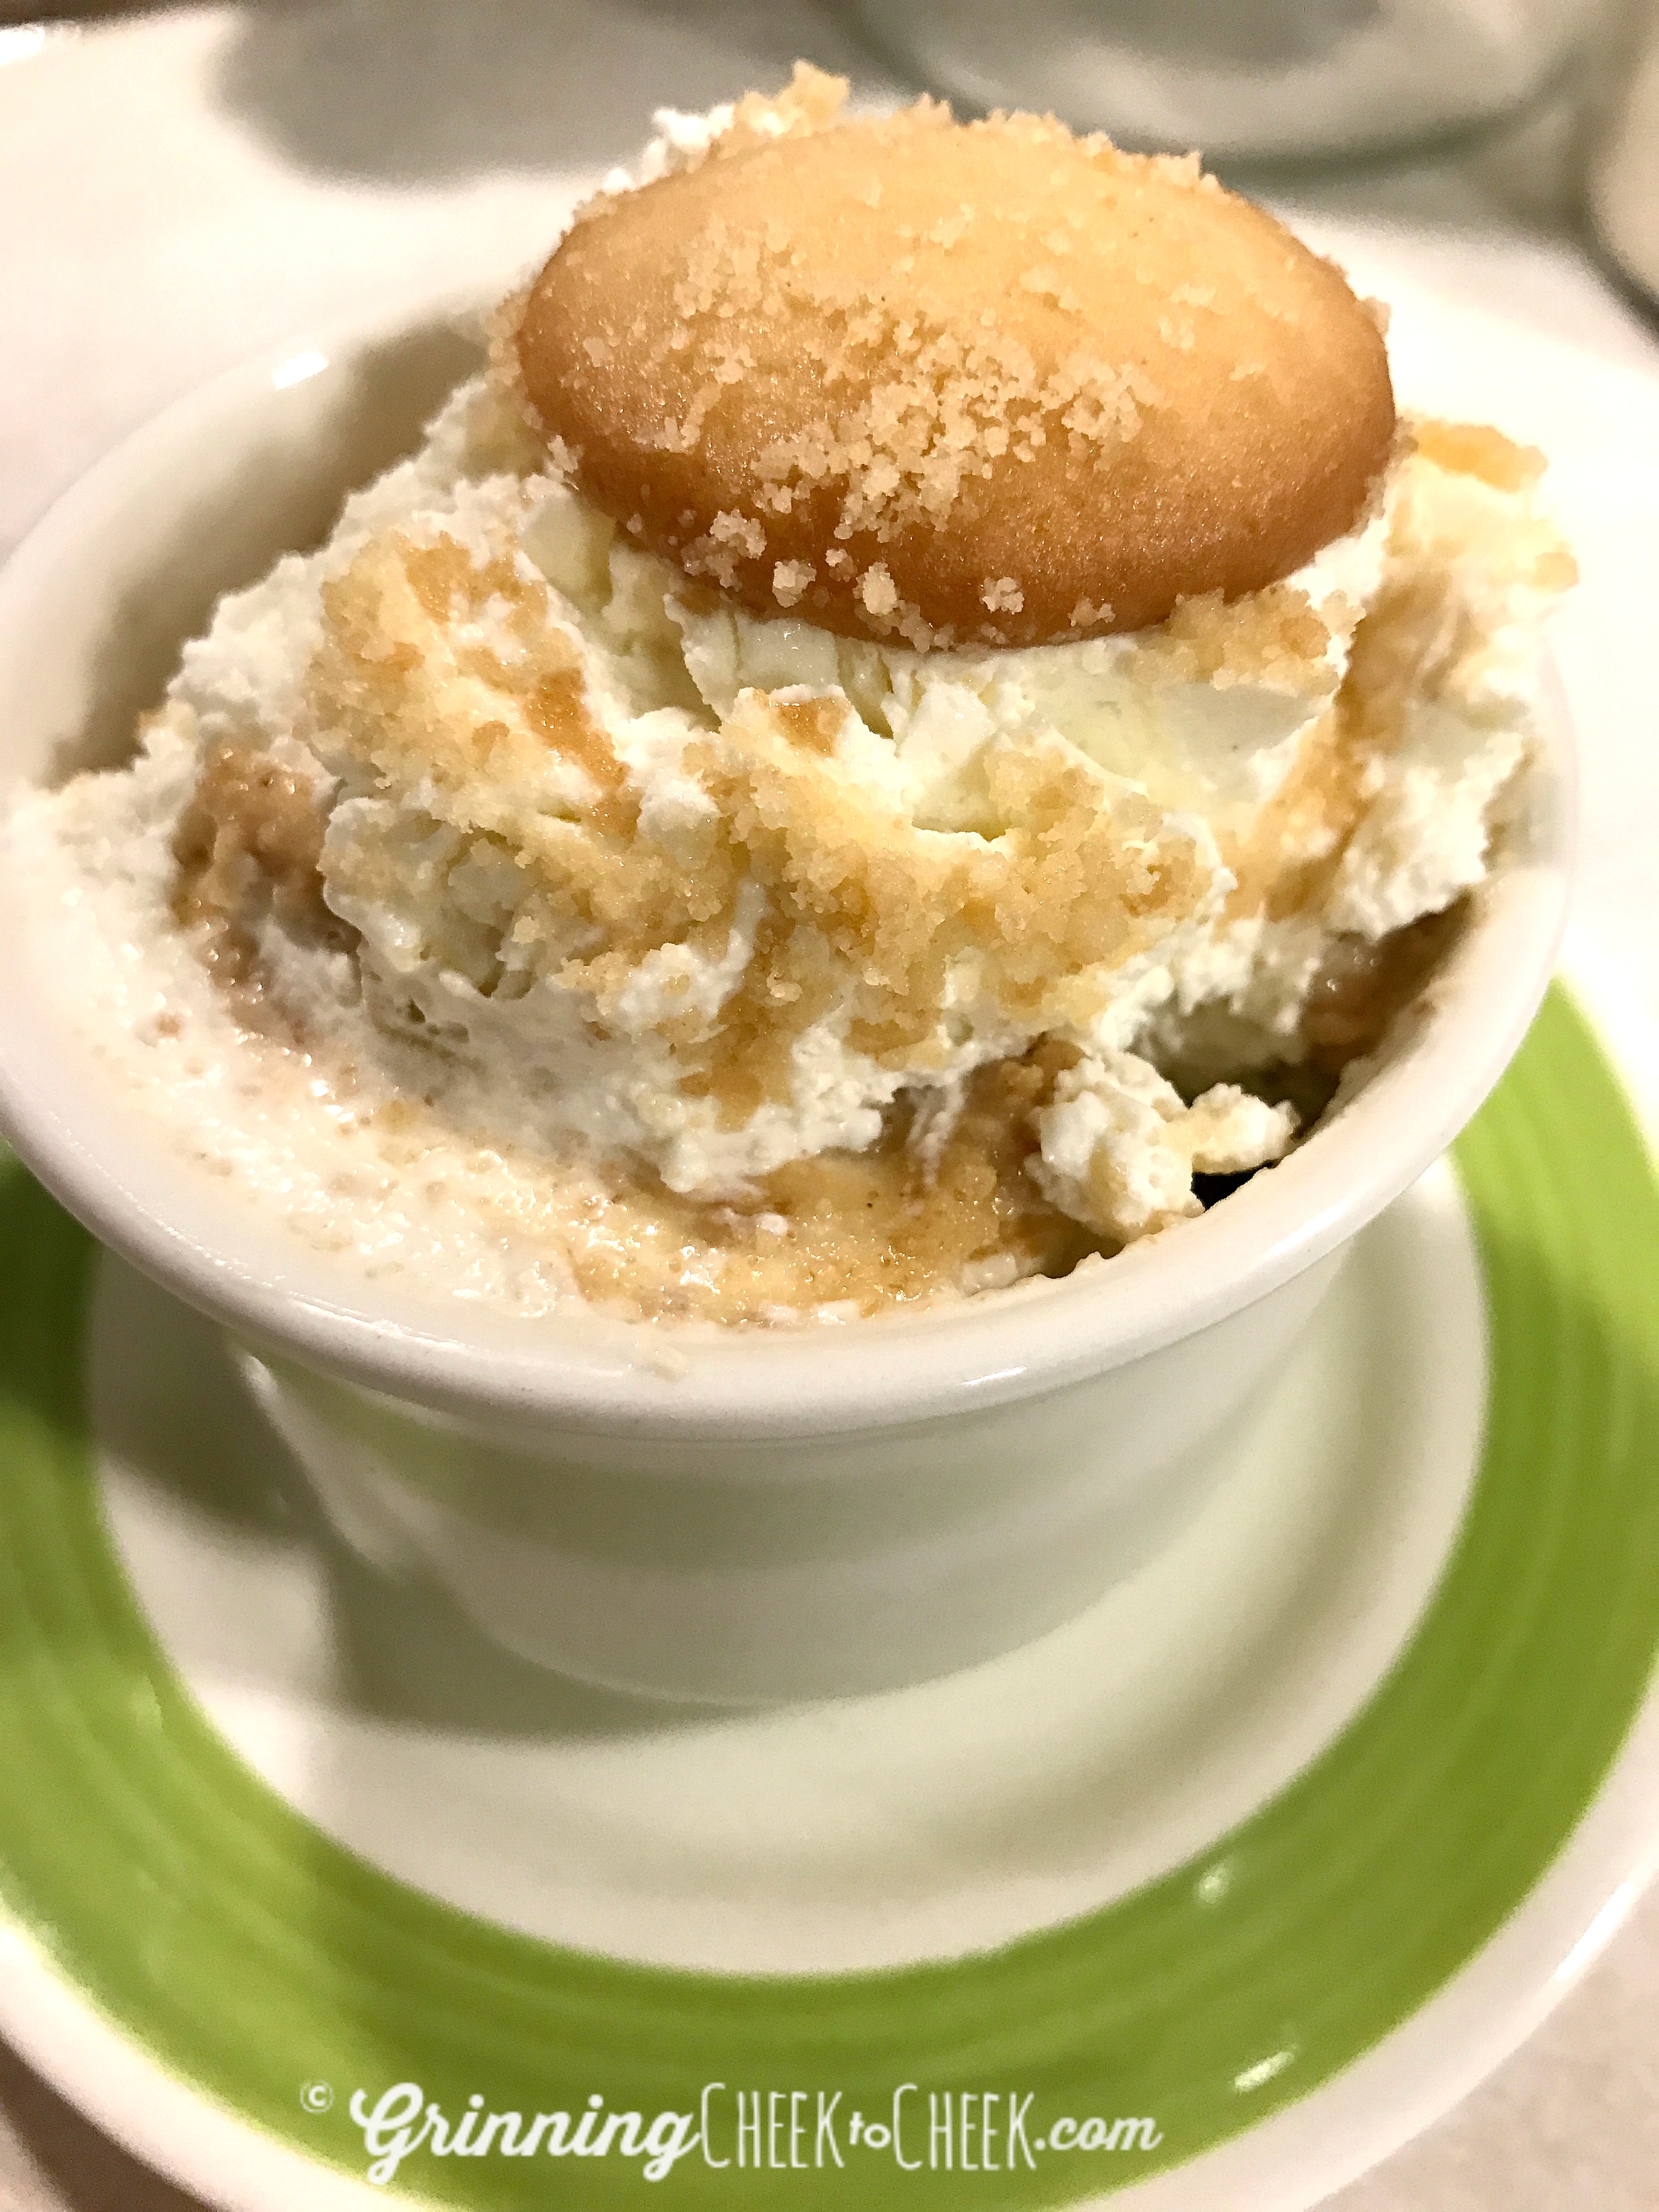 Patti Labelle S Banana Pudding Good Ol Southern Comfort Food Grinning Cheek To Cheek